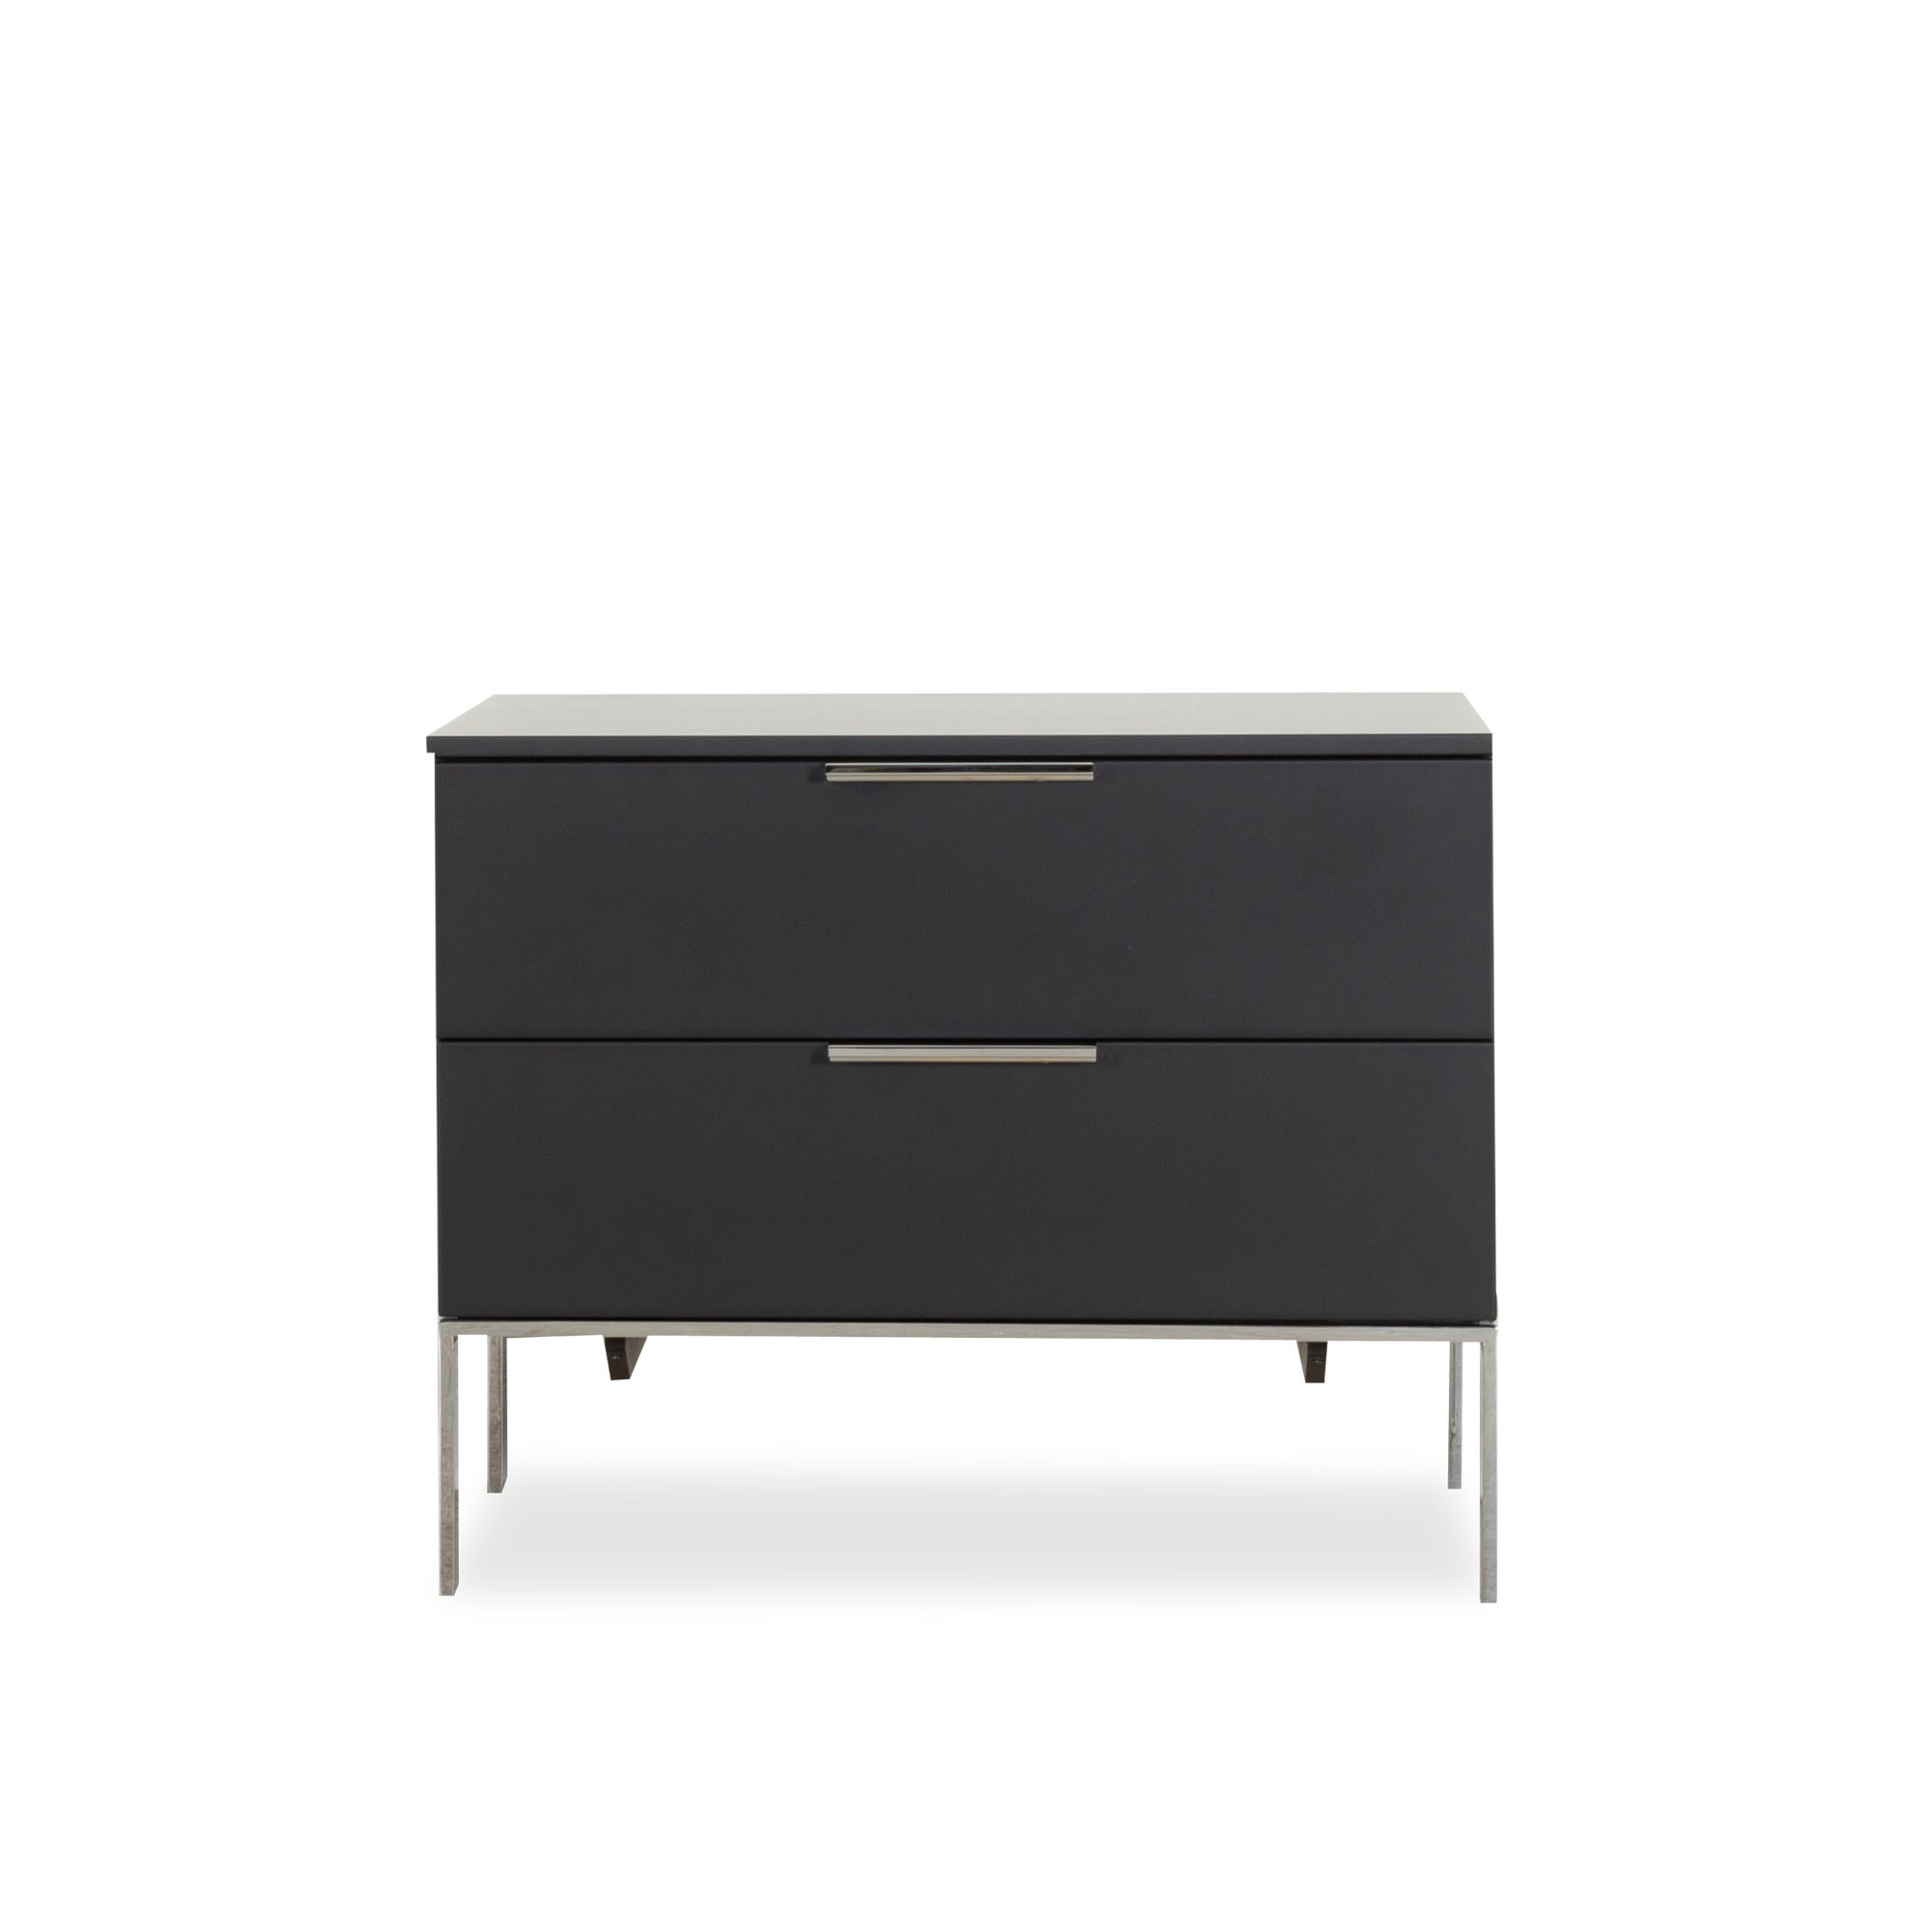 Designed by Giulio Cappellini, the Brest Nightstand is a chic and functional accent for the bedroom.